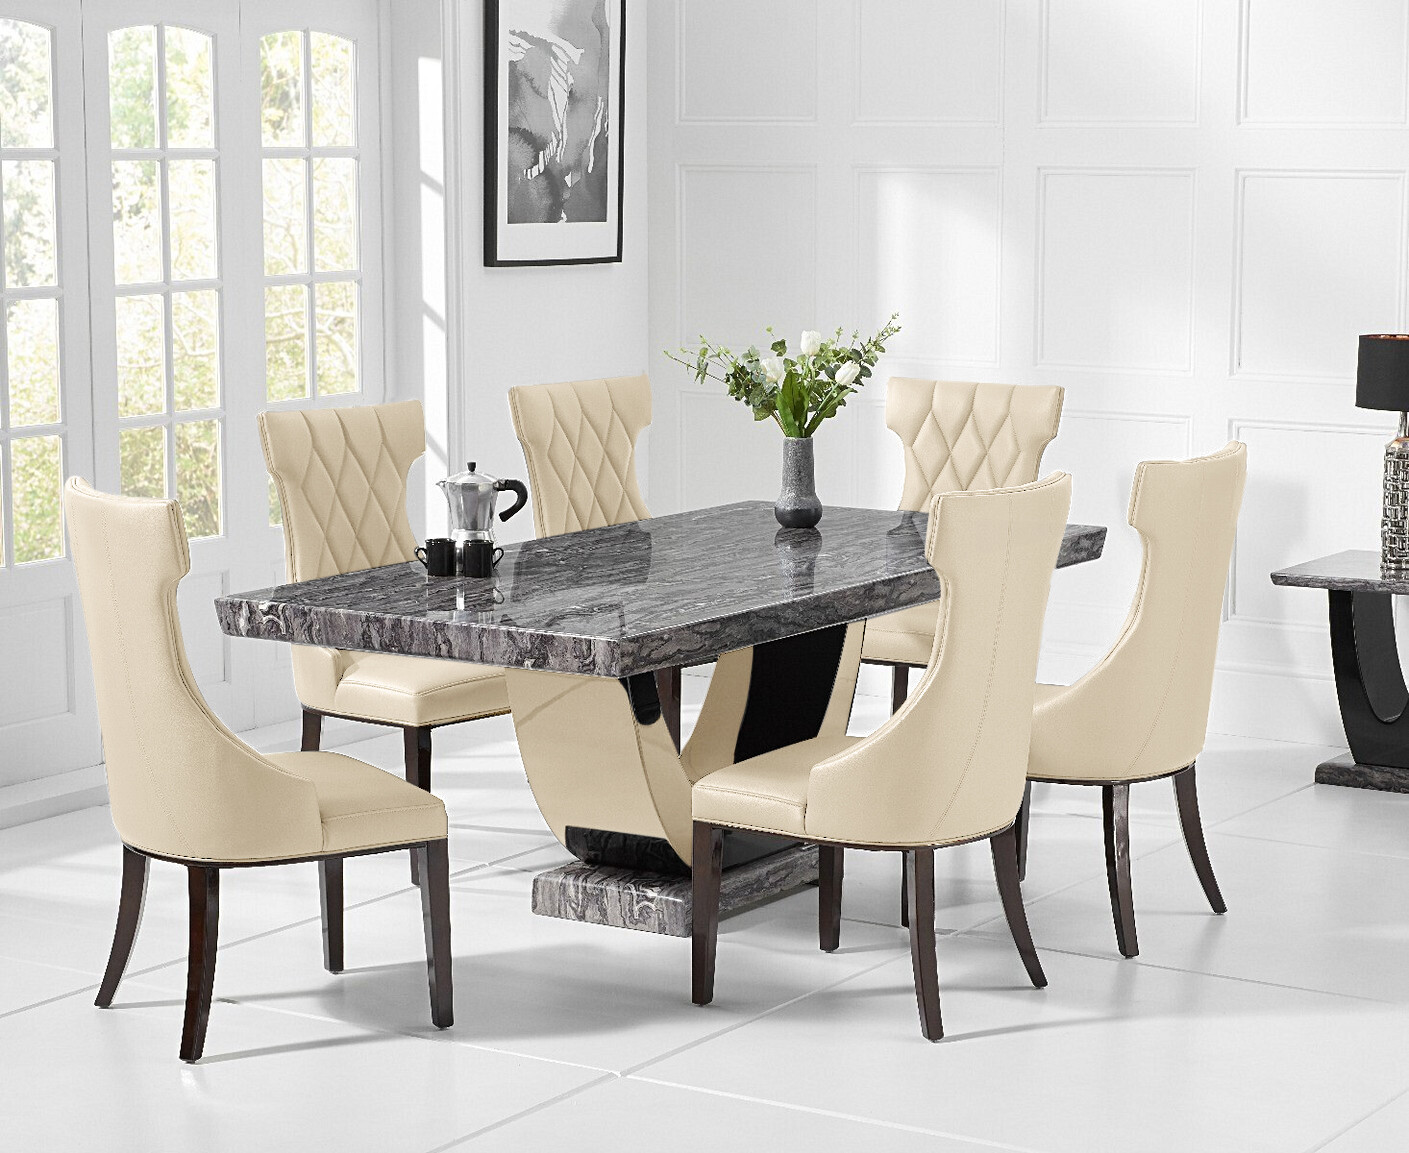 Photo 2 of Raphael 170cm dark grey pedestal marble dining table with 4 cream sophia chairs